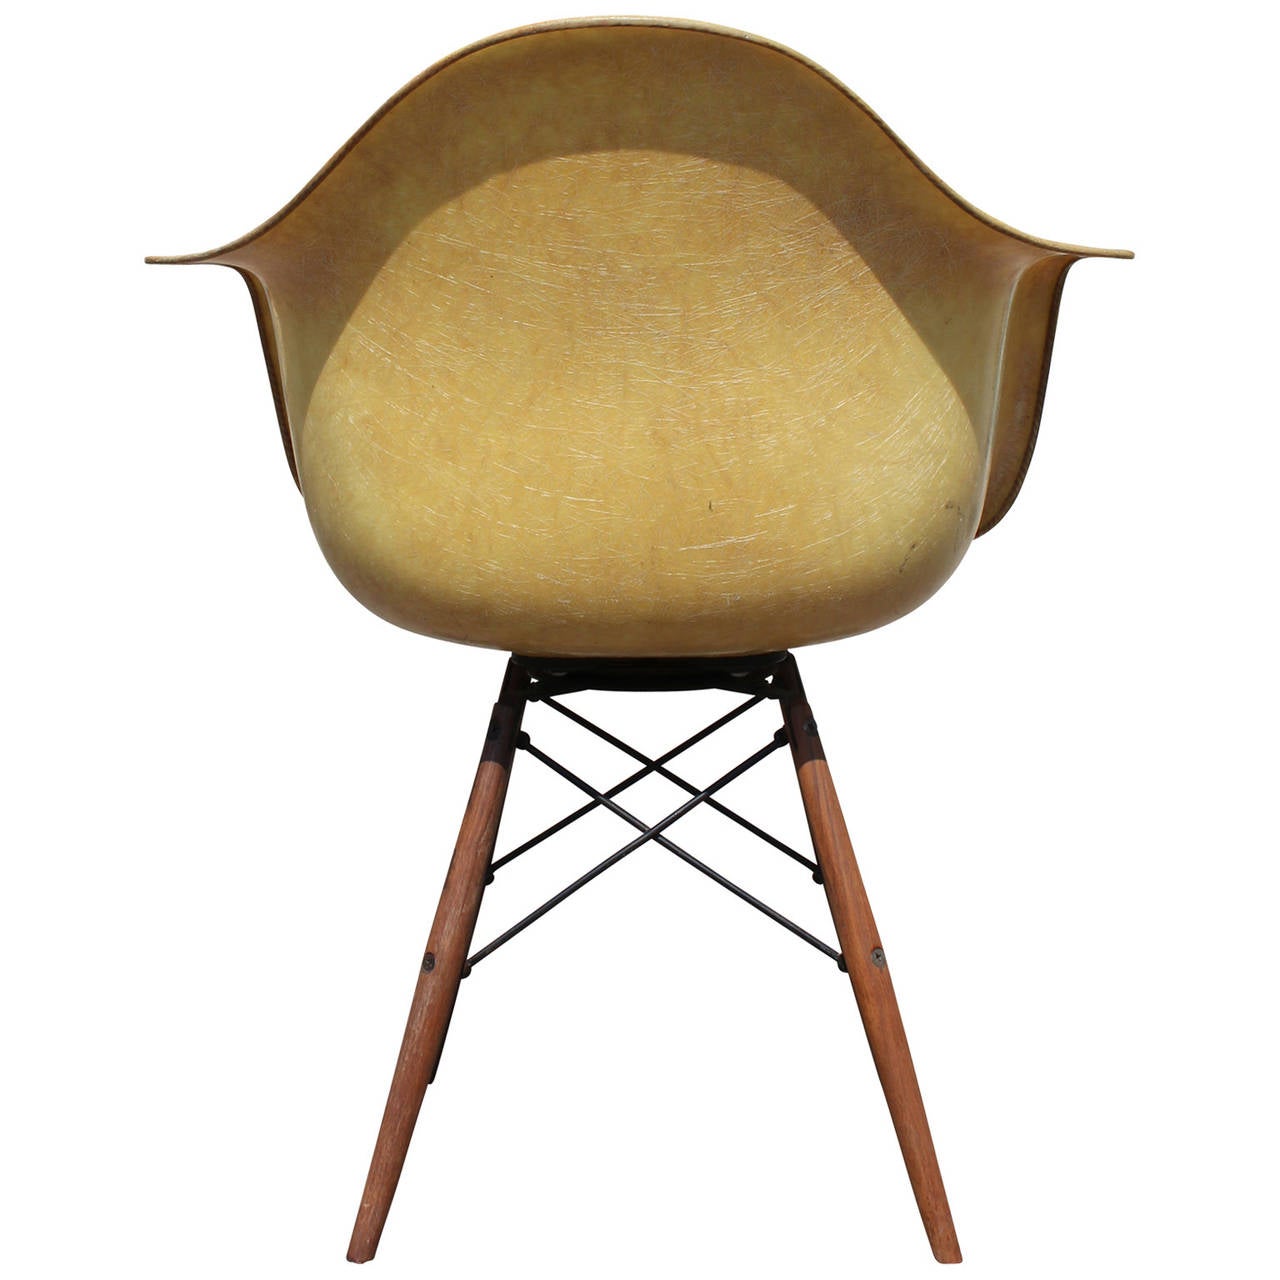 American Zenith Rope Edge Swivel PAW Armchair by Charles and Ray Eames